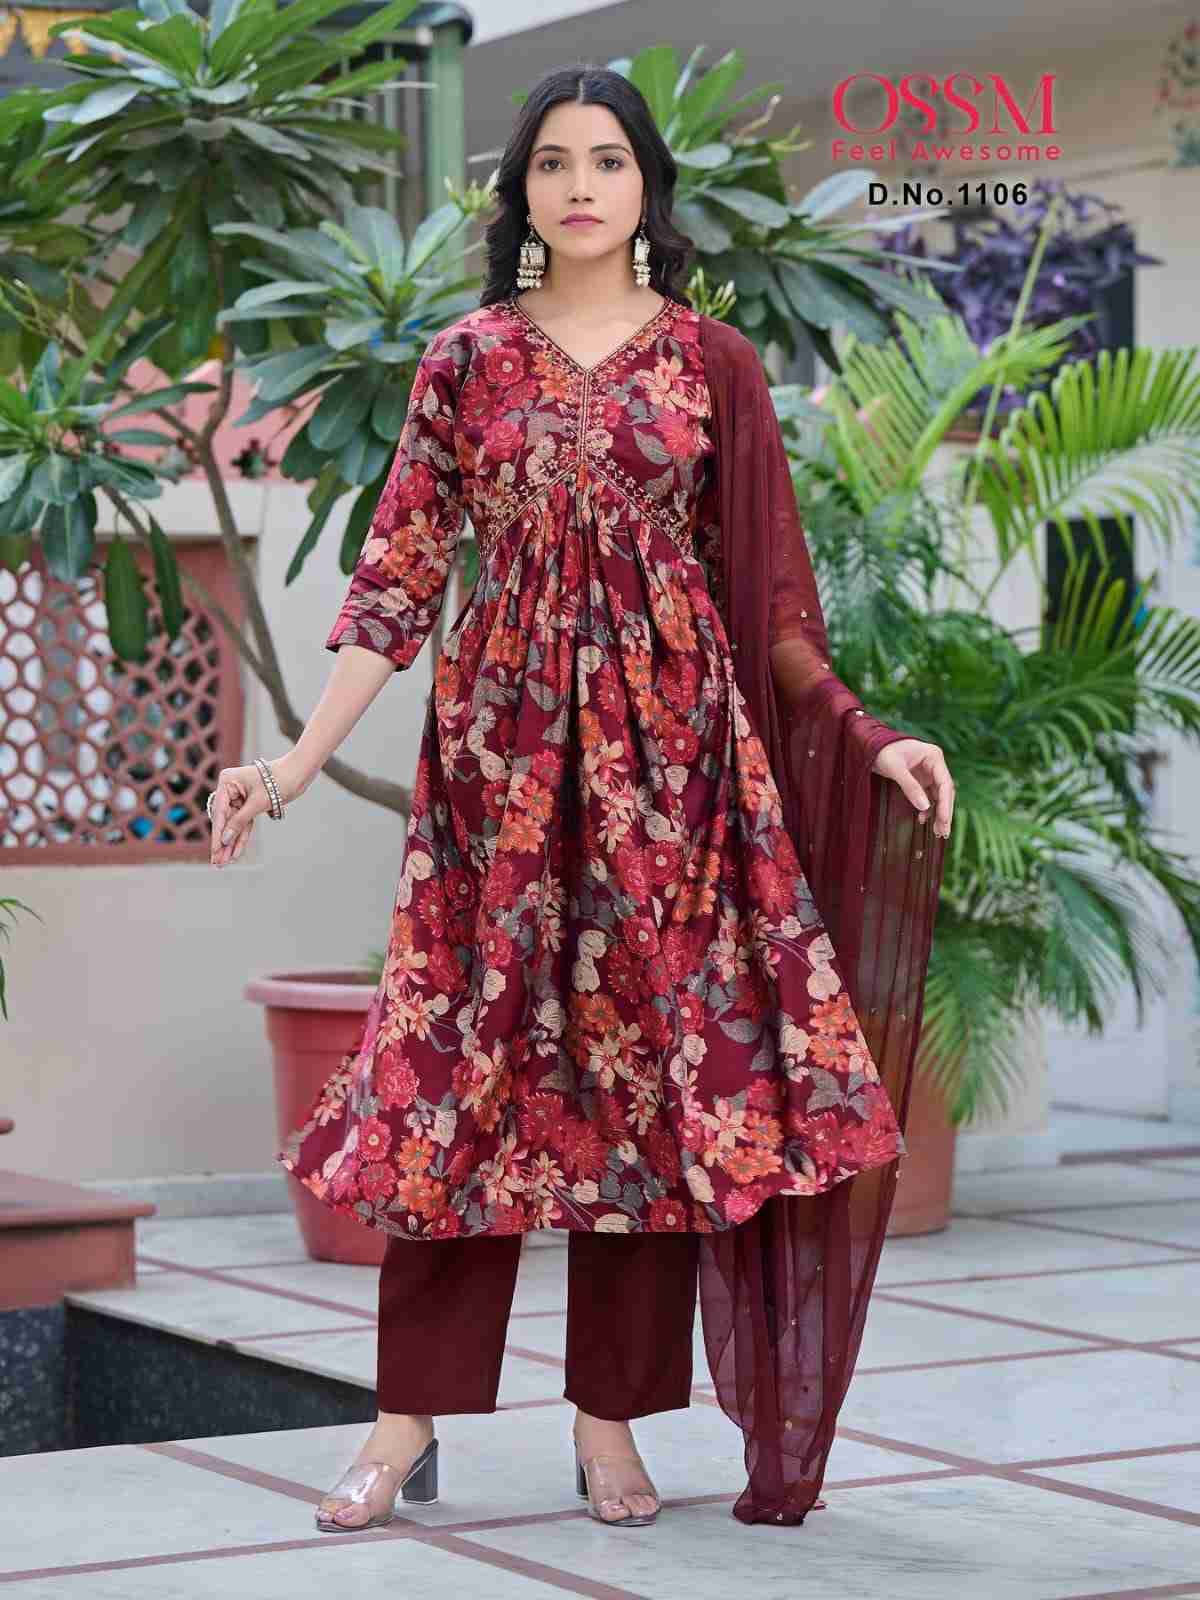 Resham Vol-11 By Ossm 1101 To 1106 Series Beautiful Suits Colorful Stylish Fancy Casual Wear & Ethnic Wear Modal Chanderi Print Dresses At Wholesale Price